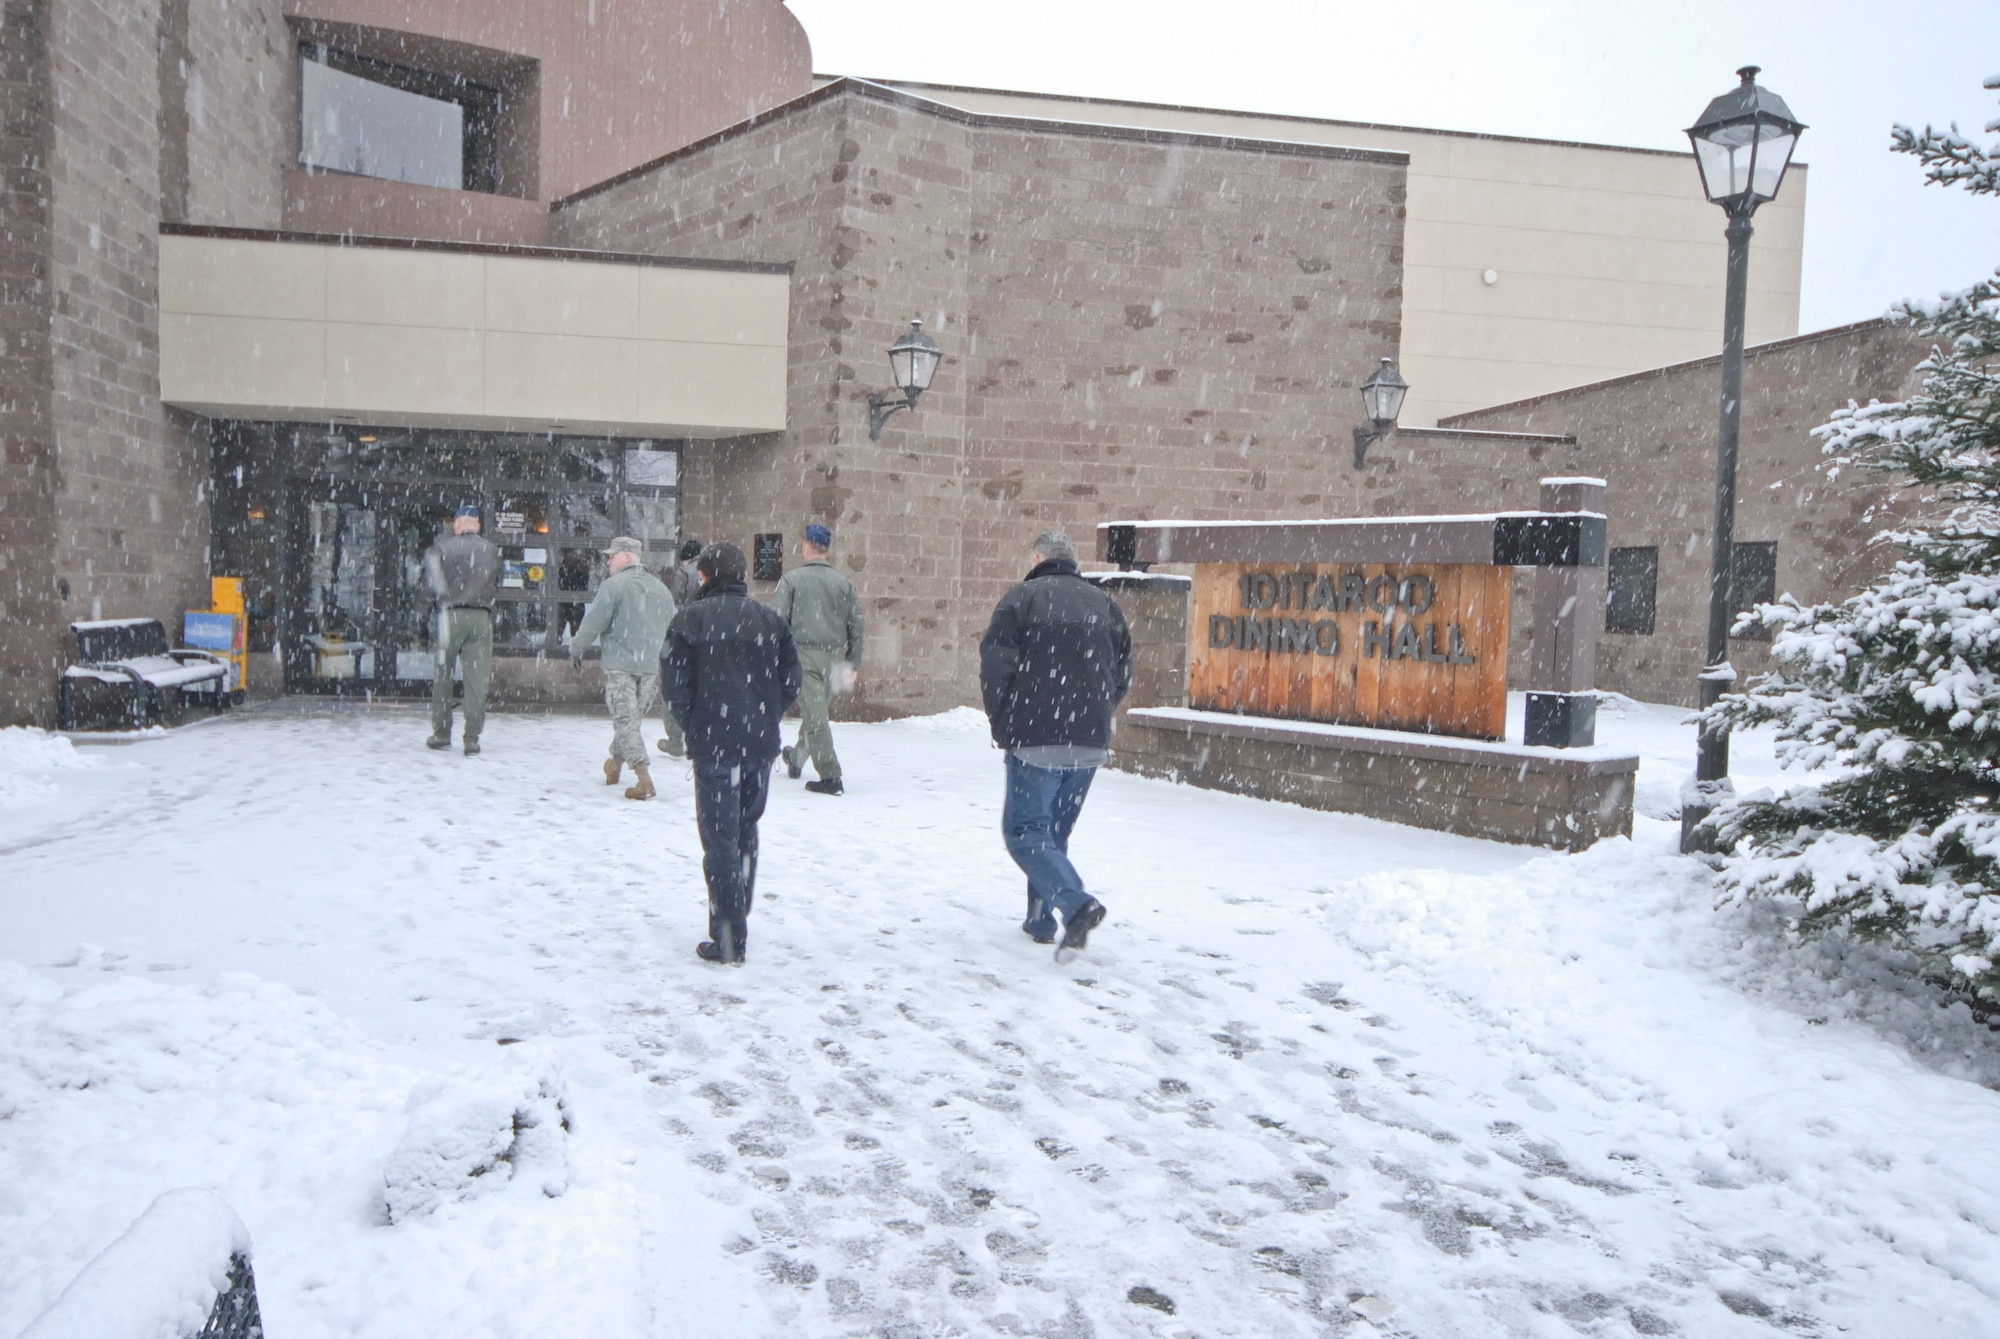 Four inches of new snow greeted the diners at the Thanksgiving meal at the Iditarod Dining Facility on Elmendorf AFB, AK